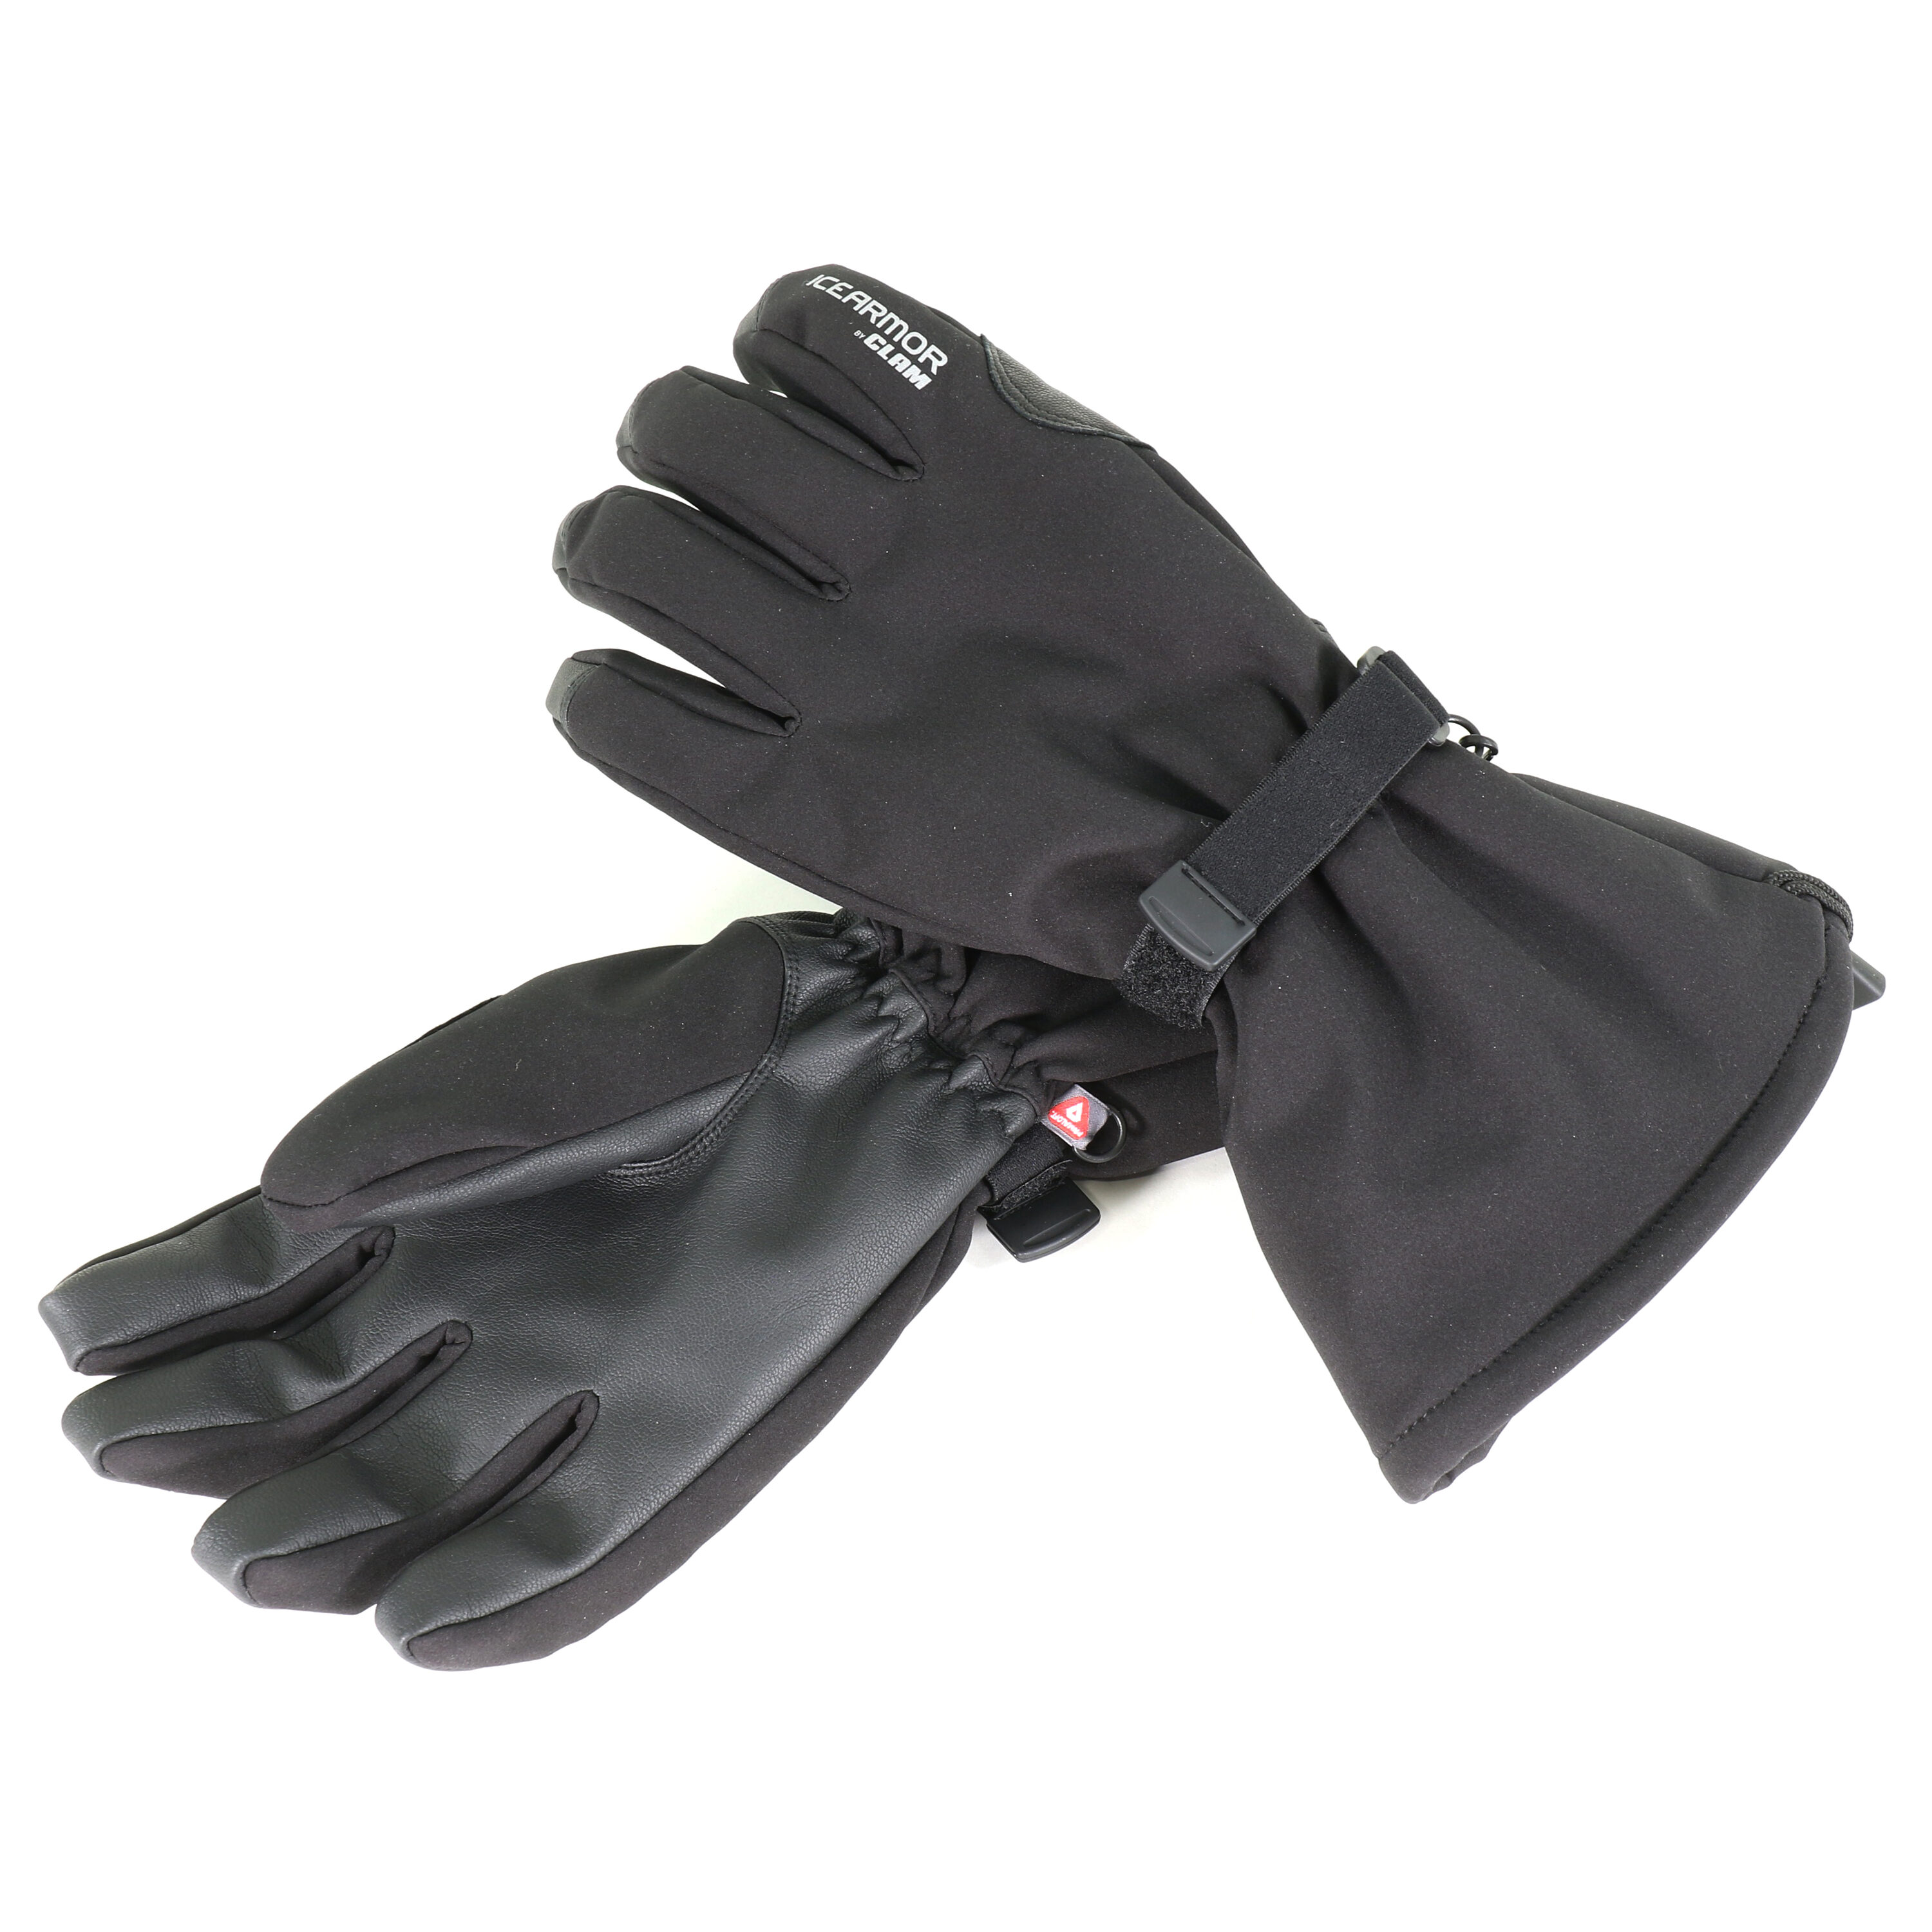 Clam Outdoors Extreme Ice Fishing Glove - Med in the Fishing Gear